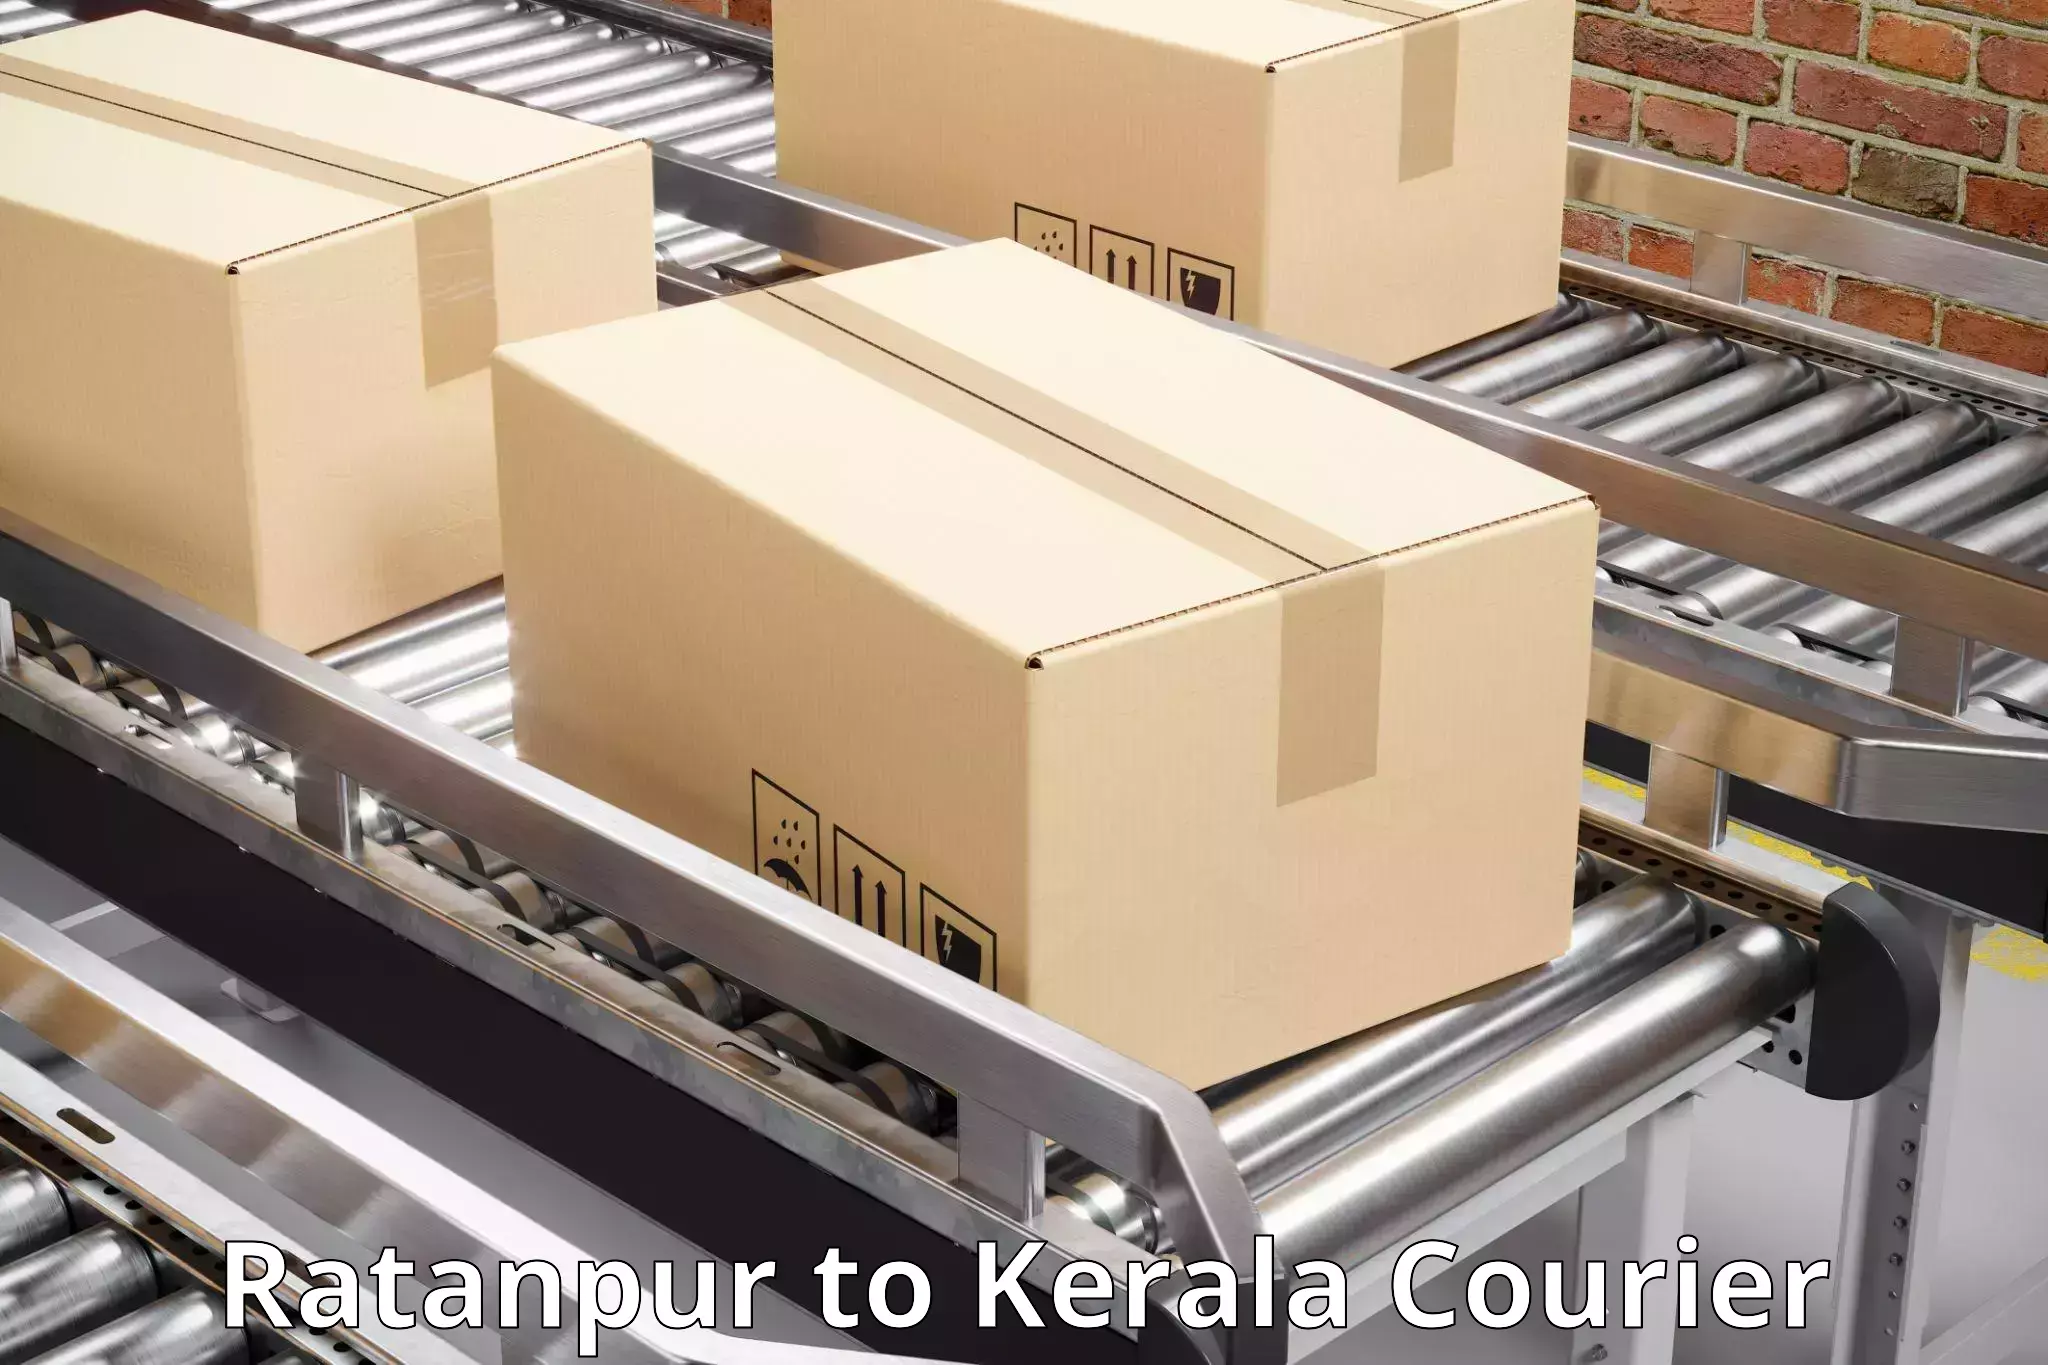 Courier services in Ratanpur to Thalassery